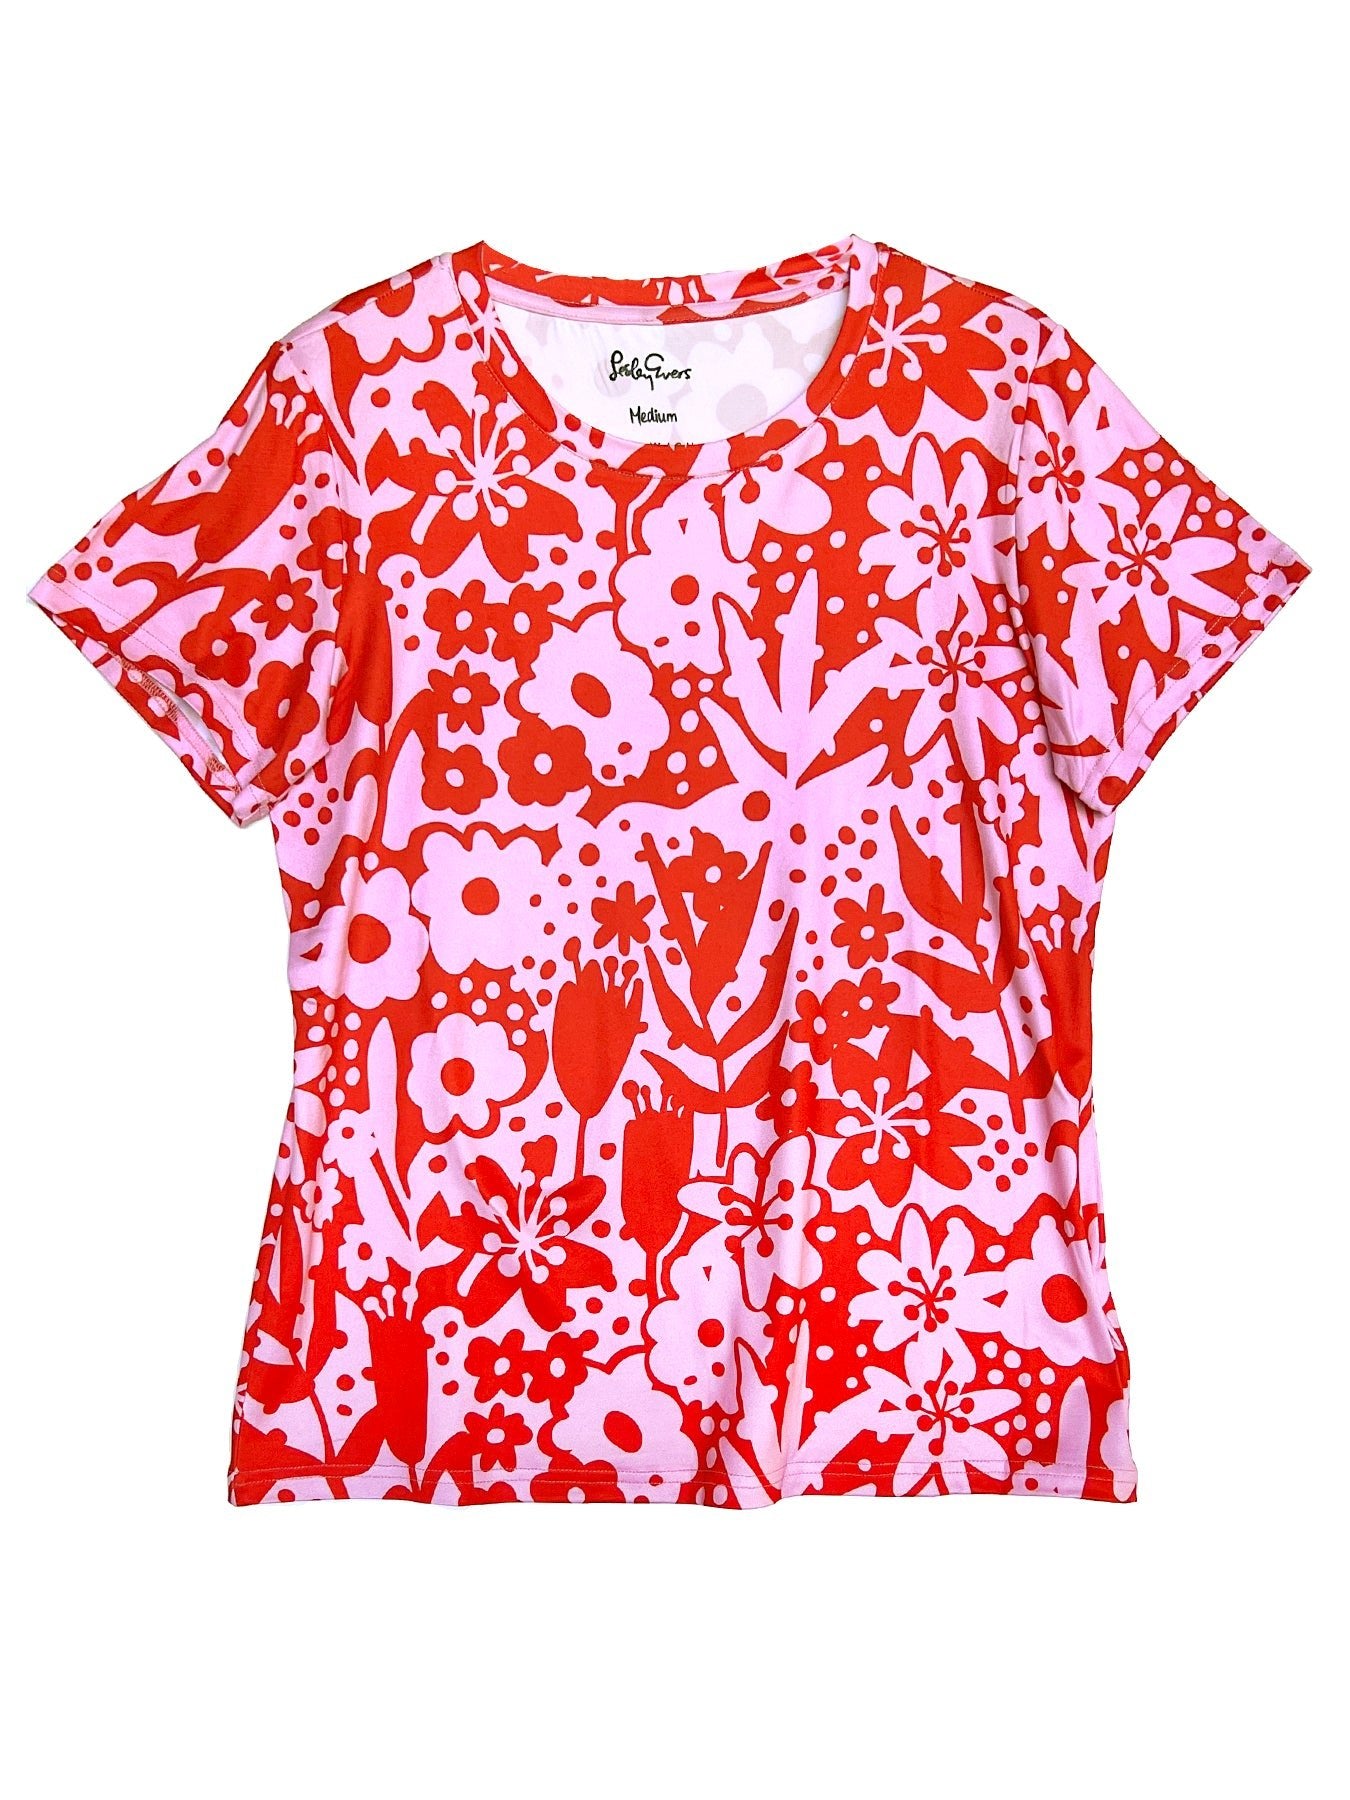 SUZI tee Flower Buds Pink - Lesley Evers-Best Seller-Shop-Shop/All Products